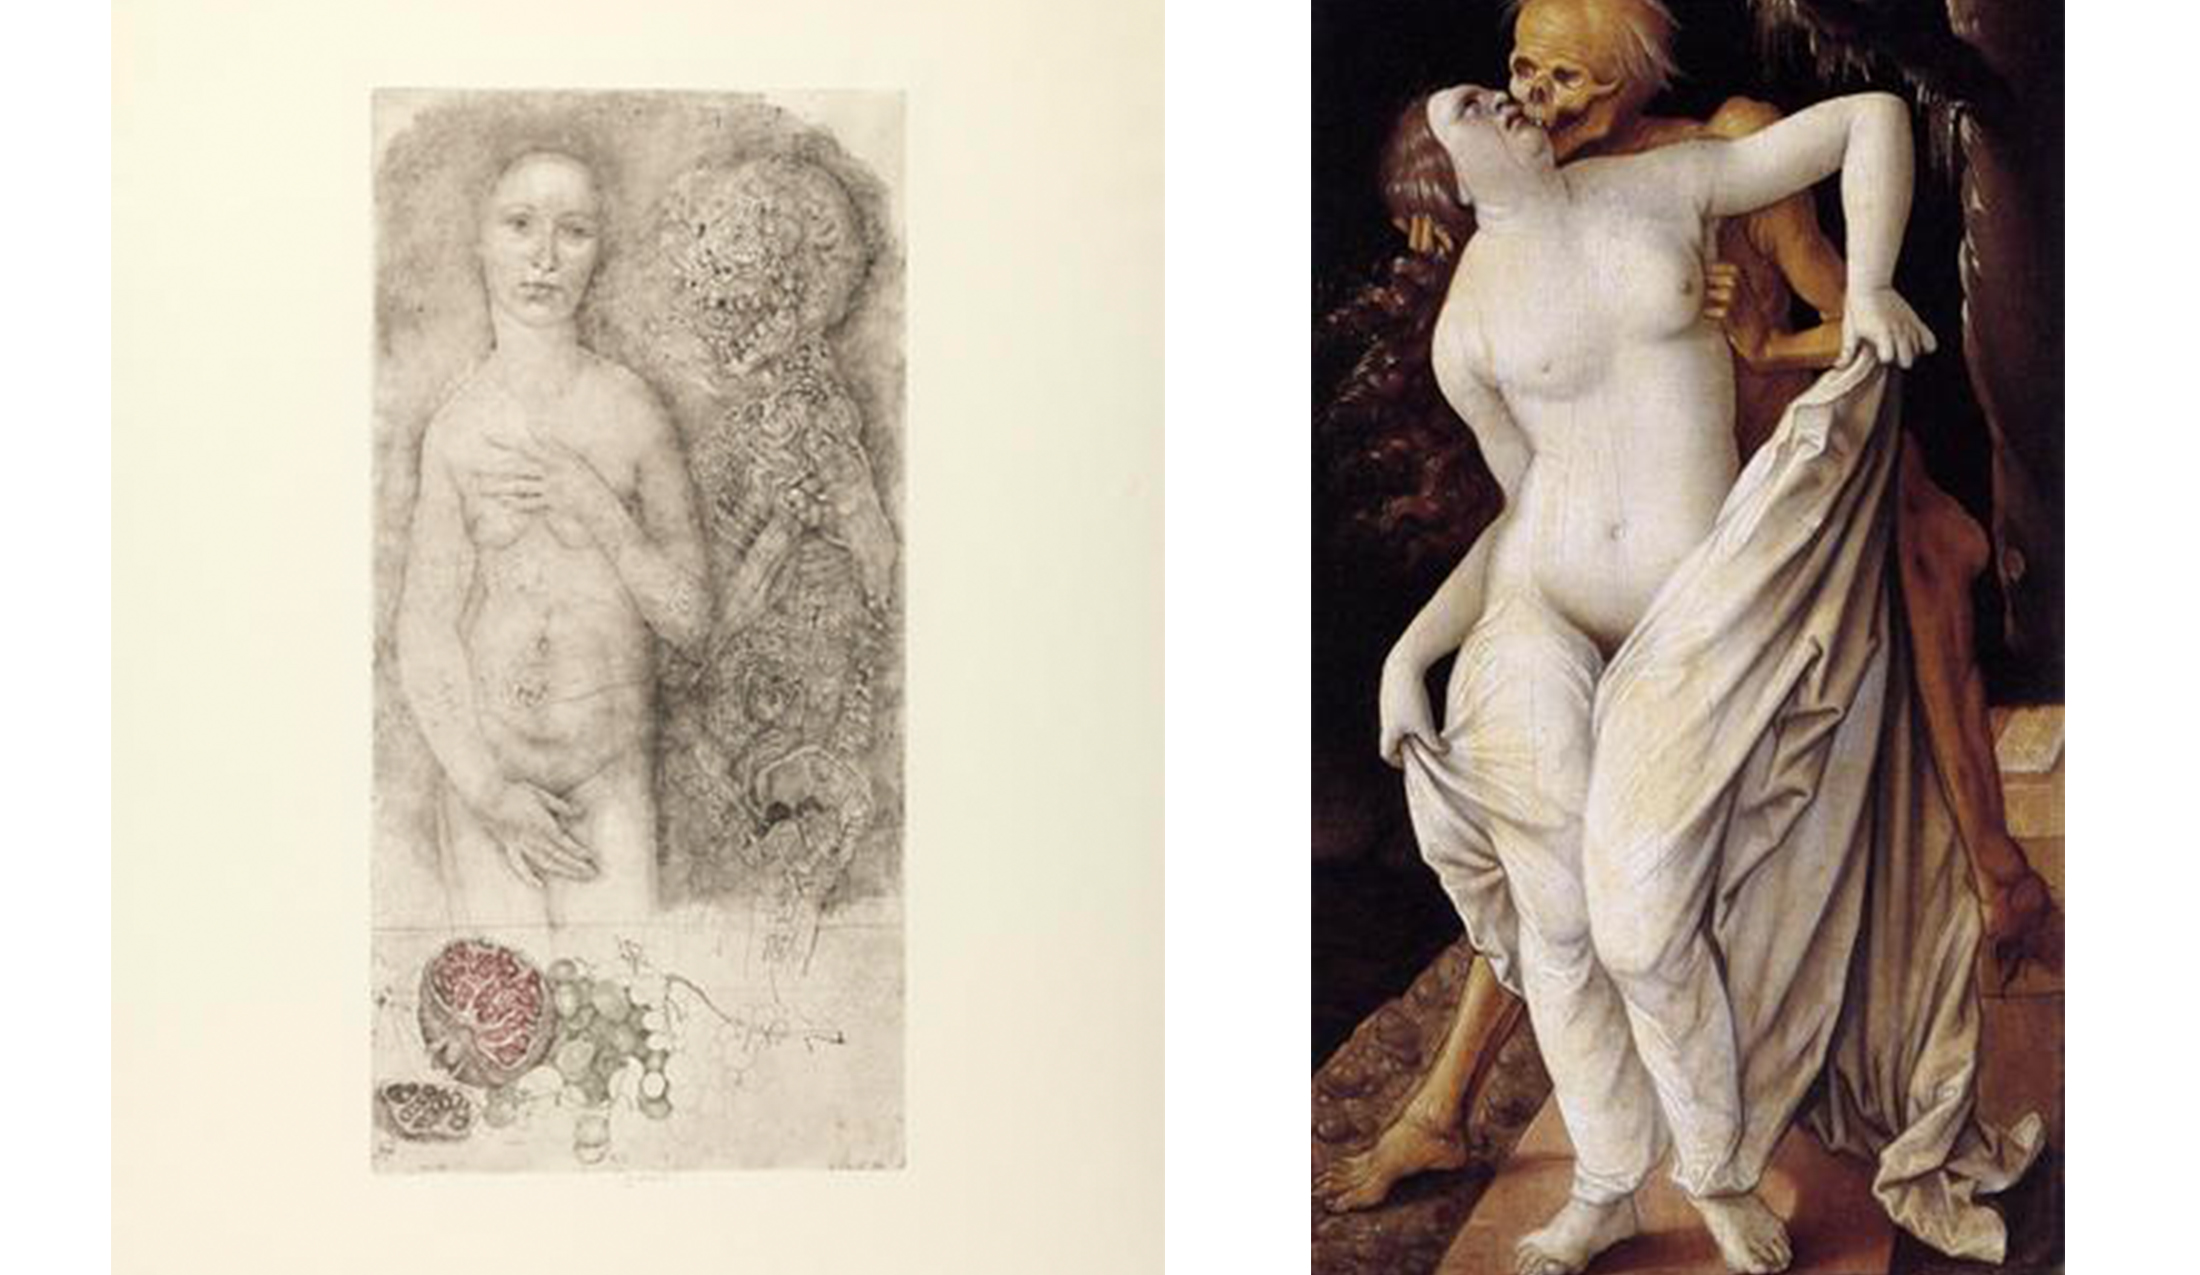 left: nude young woman standing at left near skeleton with flowers at lower left. right: nude woman with yellow skeleton behind her, trying to kiss her; woman has expression of disgust on her face